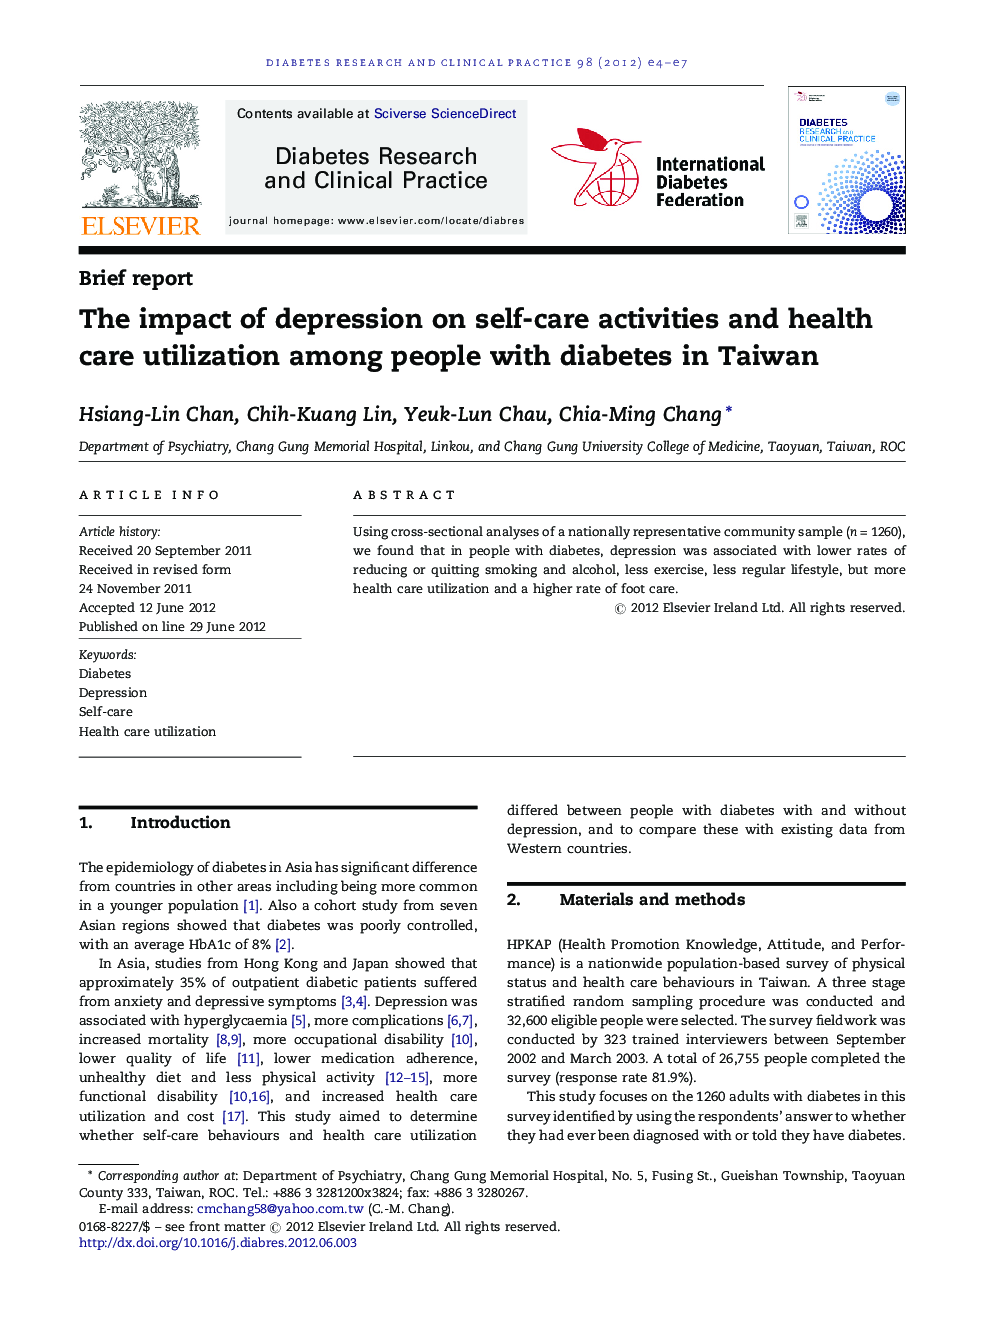 The impact of depression on self-care activities and health care utilization among people with diabetes in Taiwan